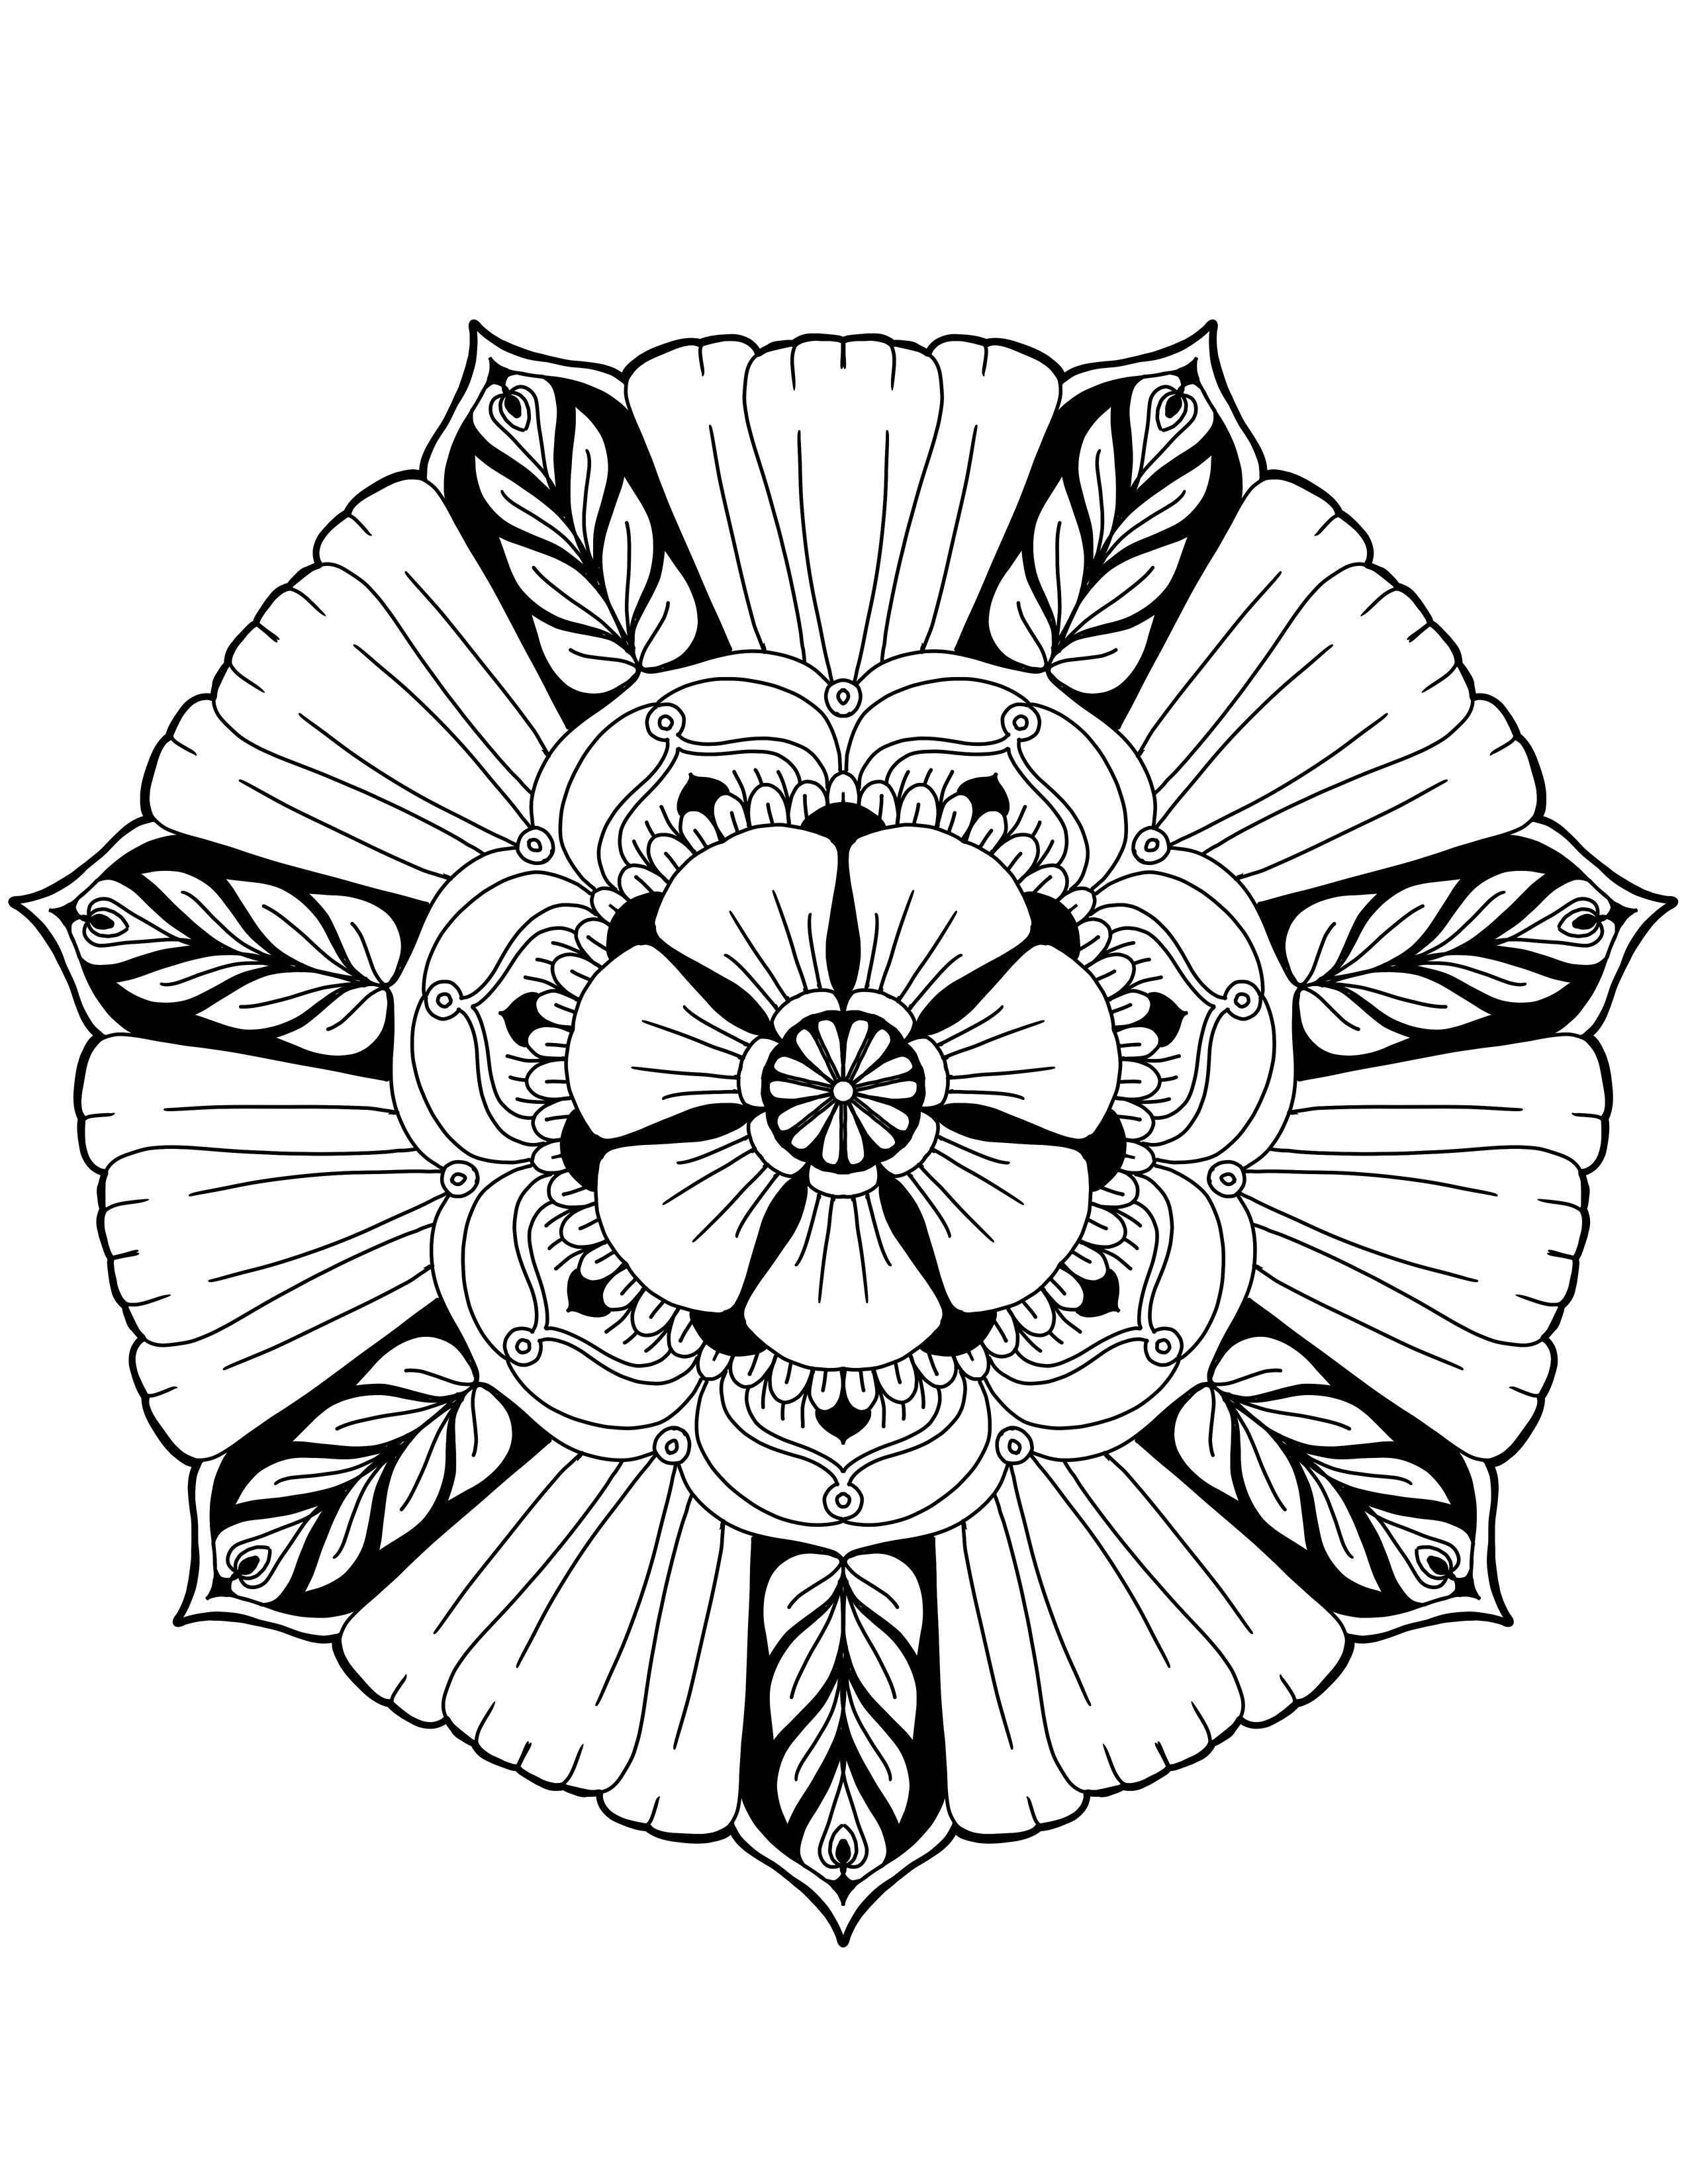 Easy Mandala Coloring Pages Art Coloring Pages